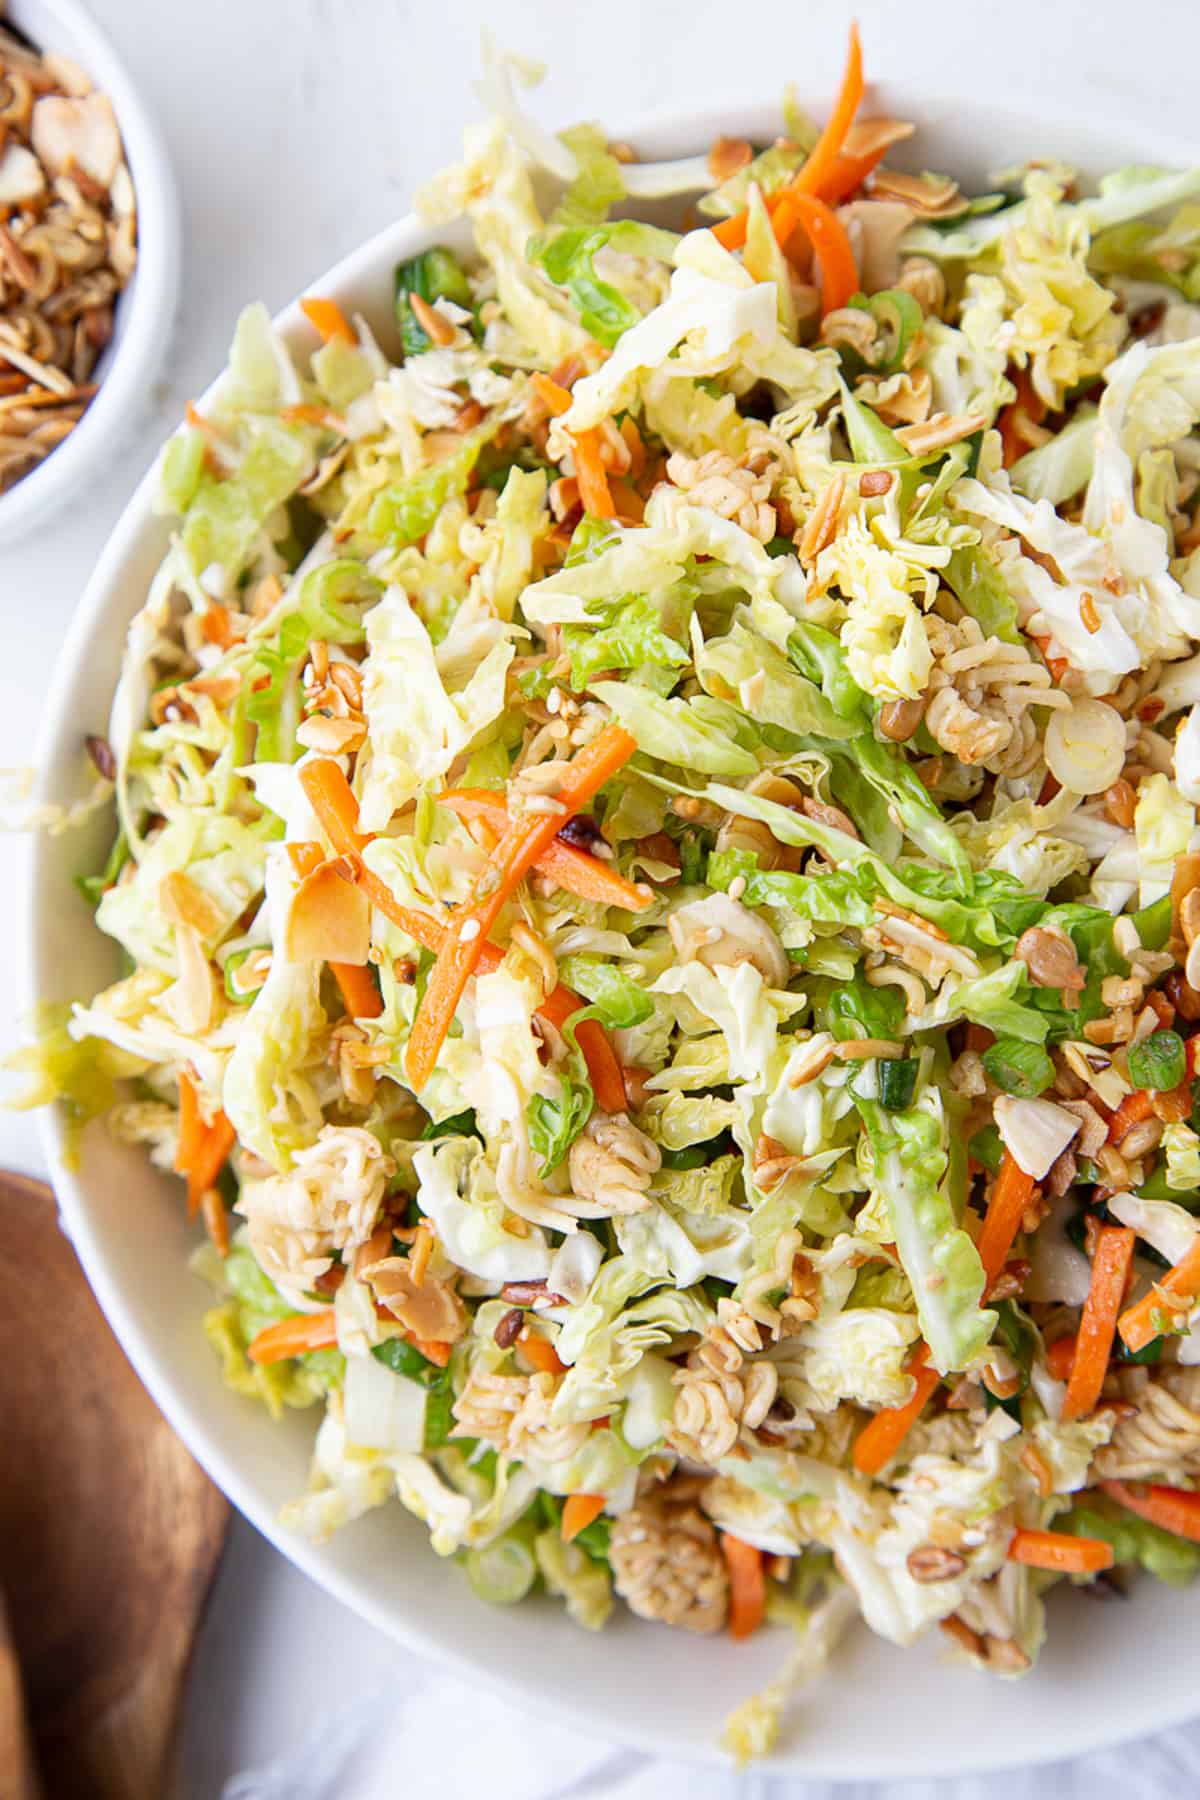 shredded cabbage, carrots, and crumbled ramen noodles in a large white bowl.